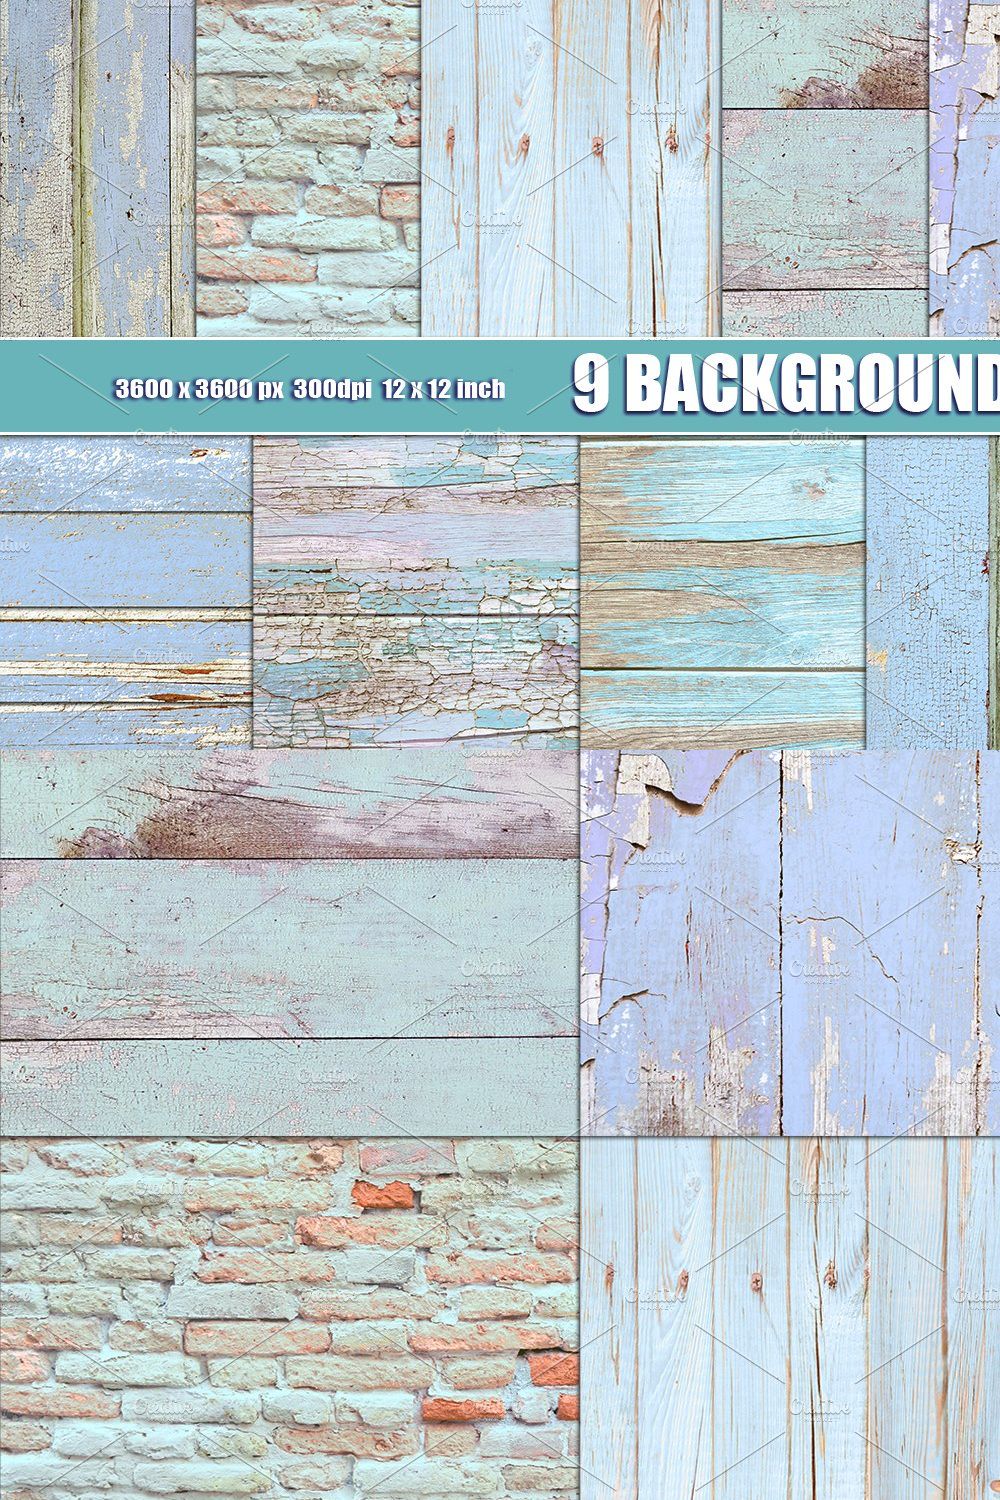 Shabby wood and brick wall texture pinterest preview image.